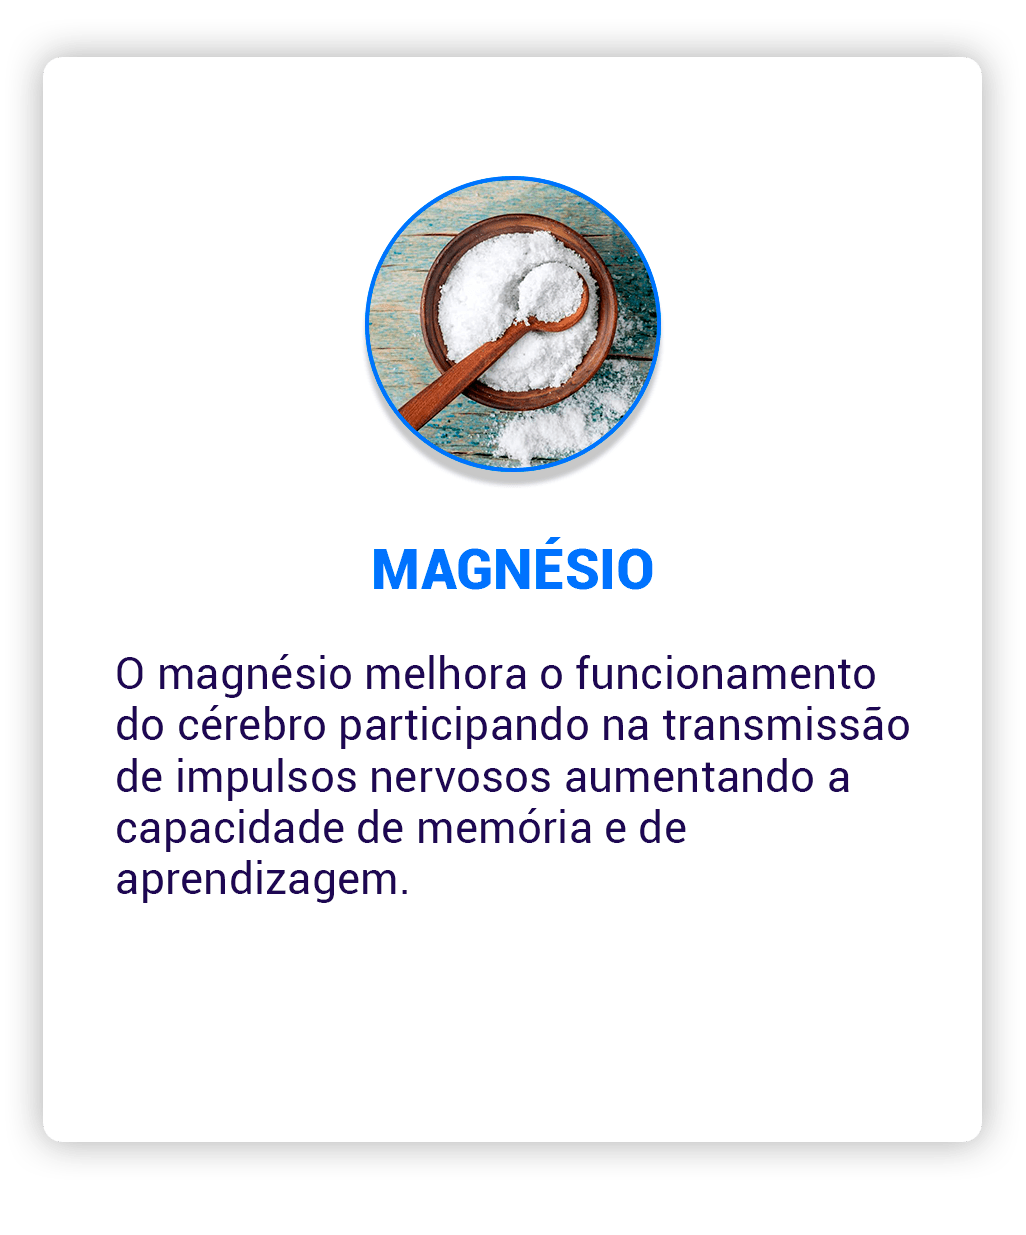 Magnesio-min.png